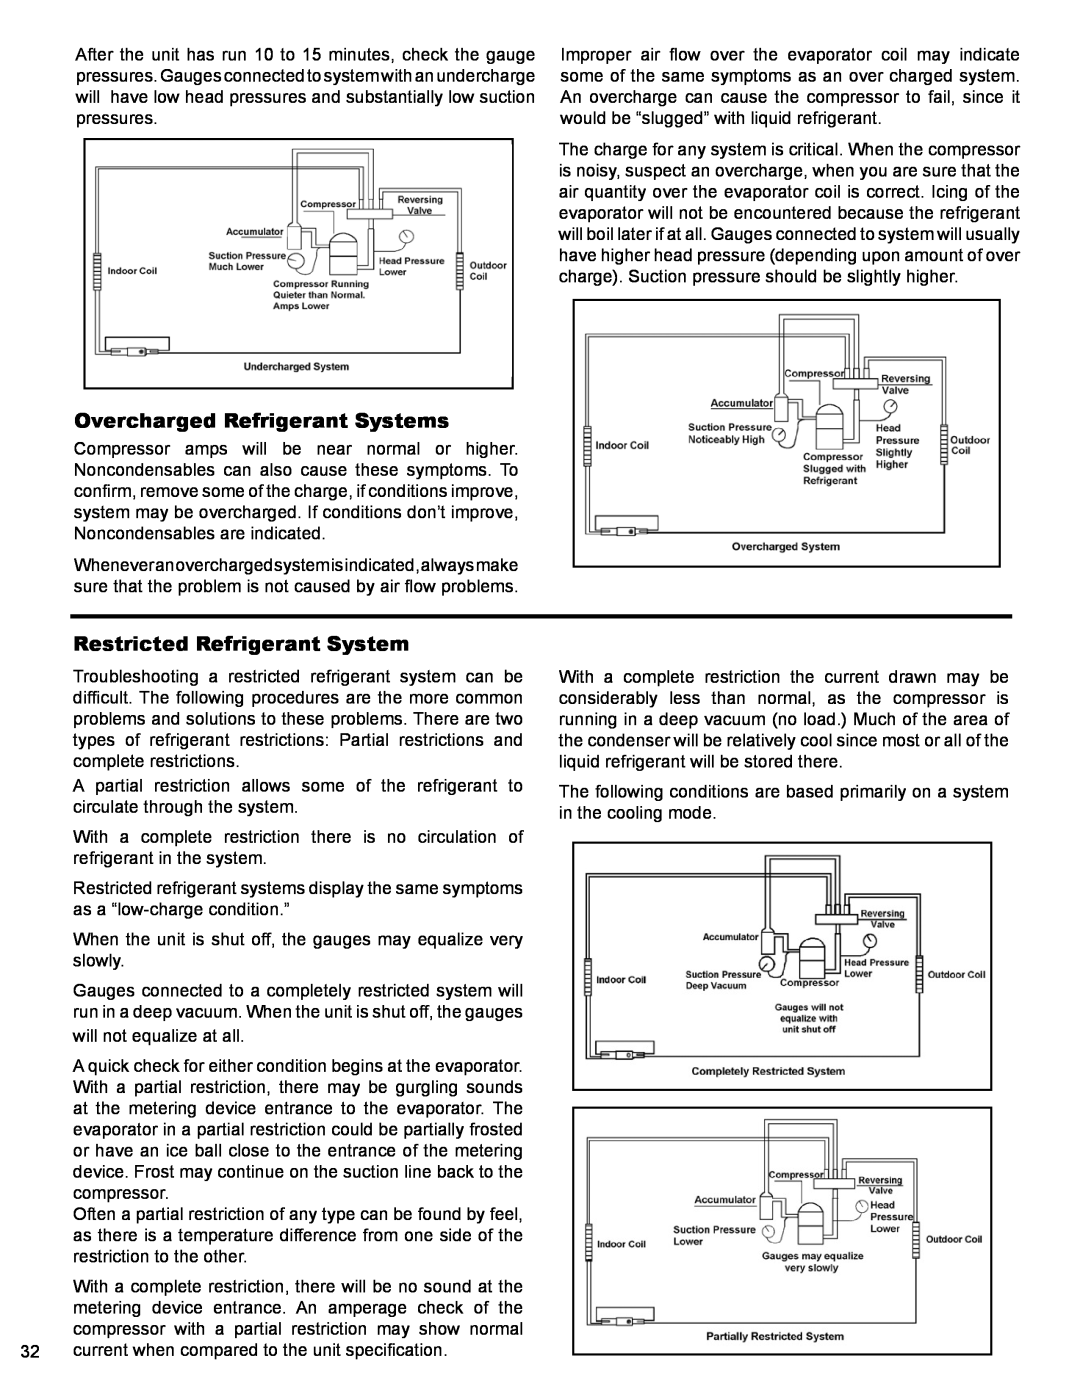 Friedrich PTAC - R410A service manual Overcharged Refrigerant Systems, Restricted Refrigerant System 